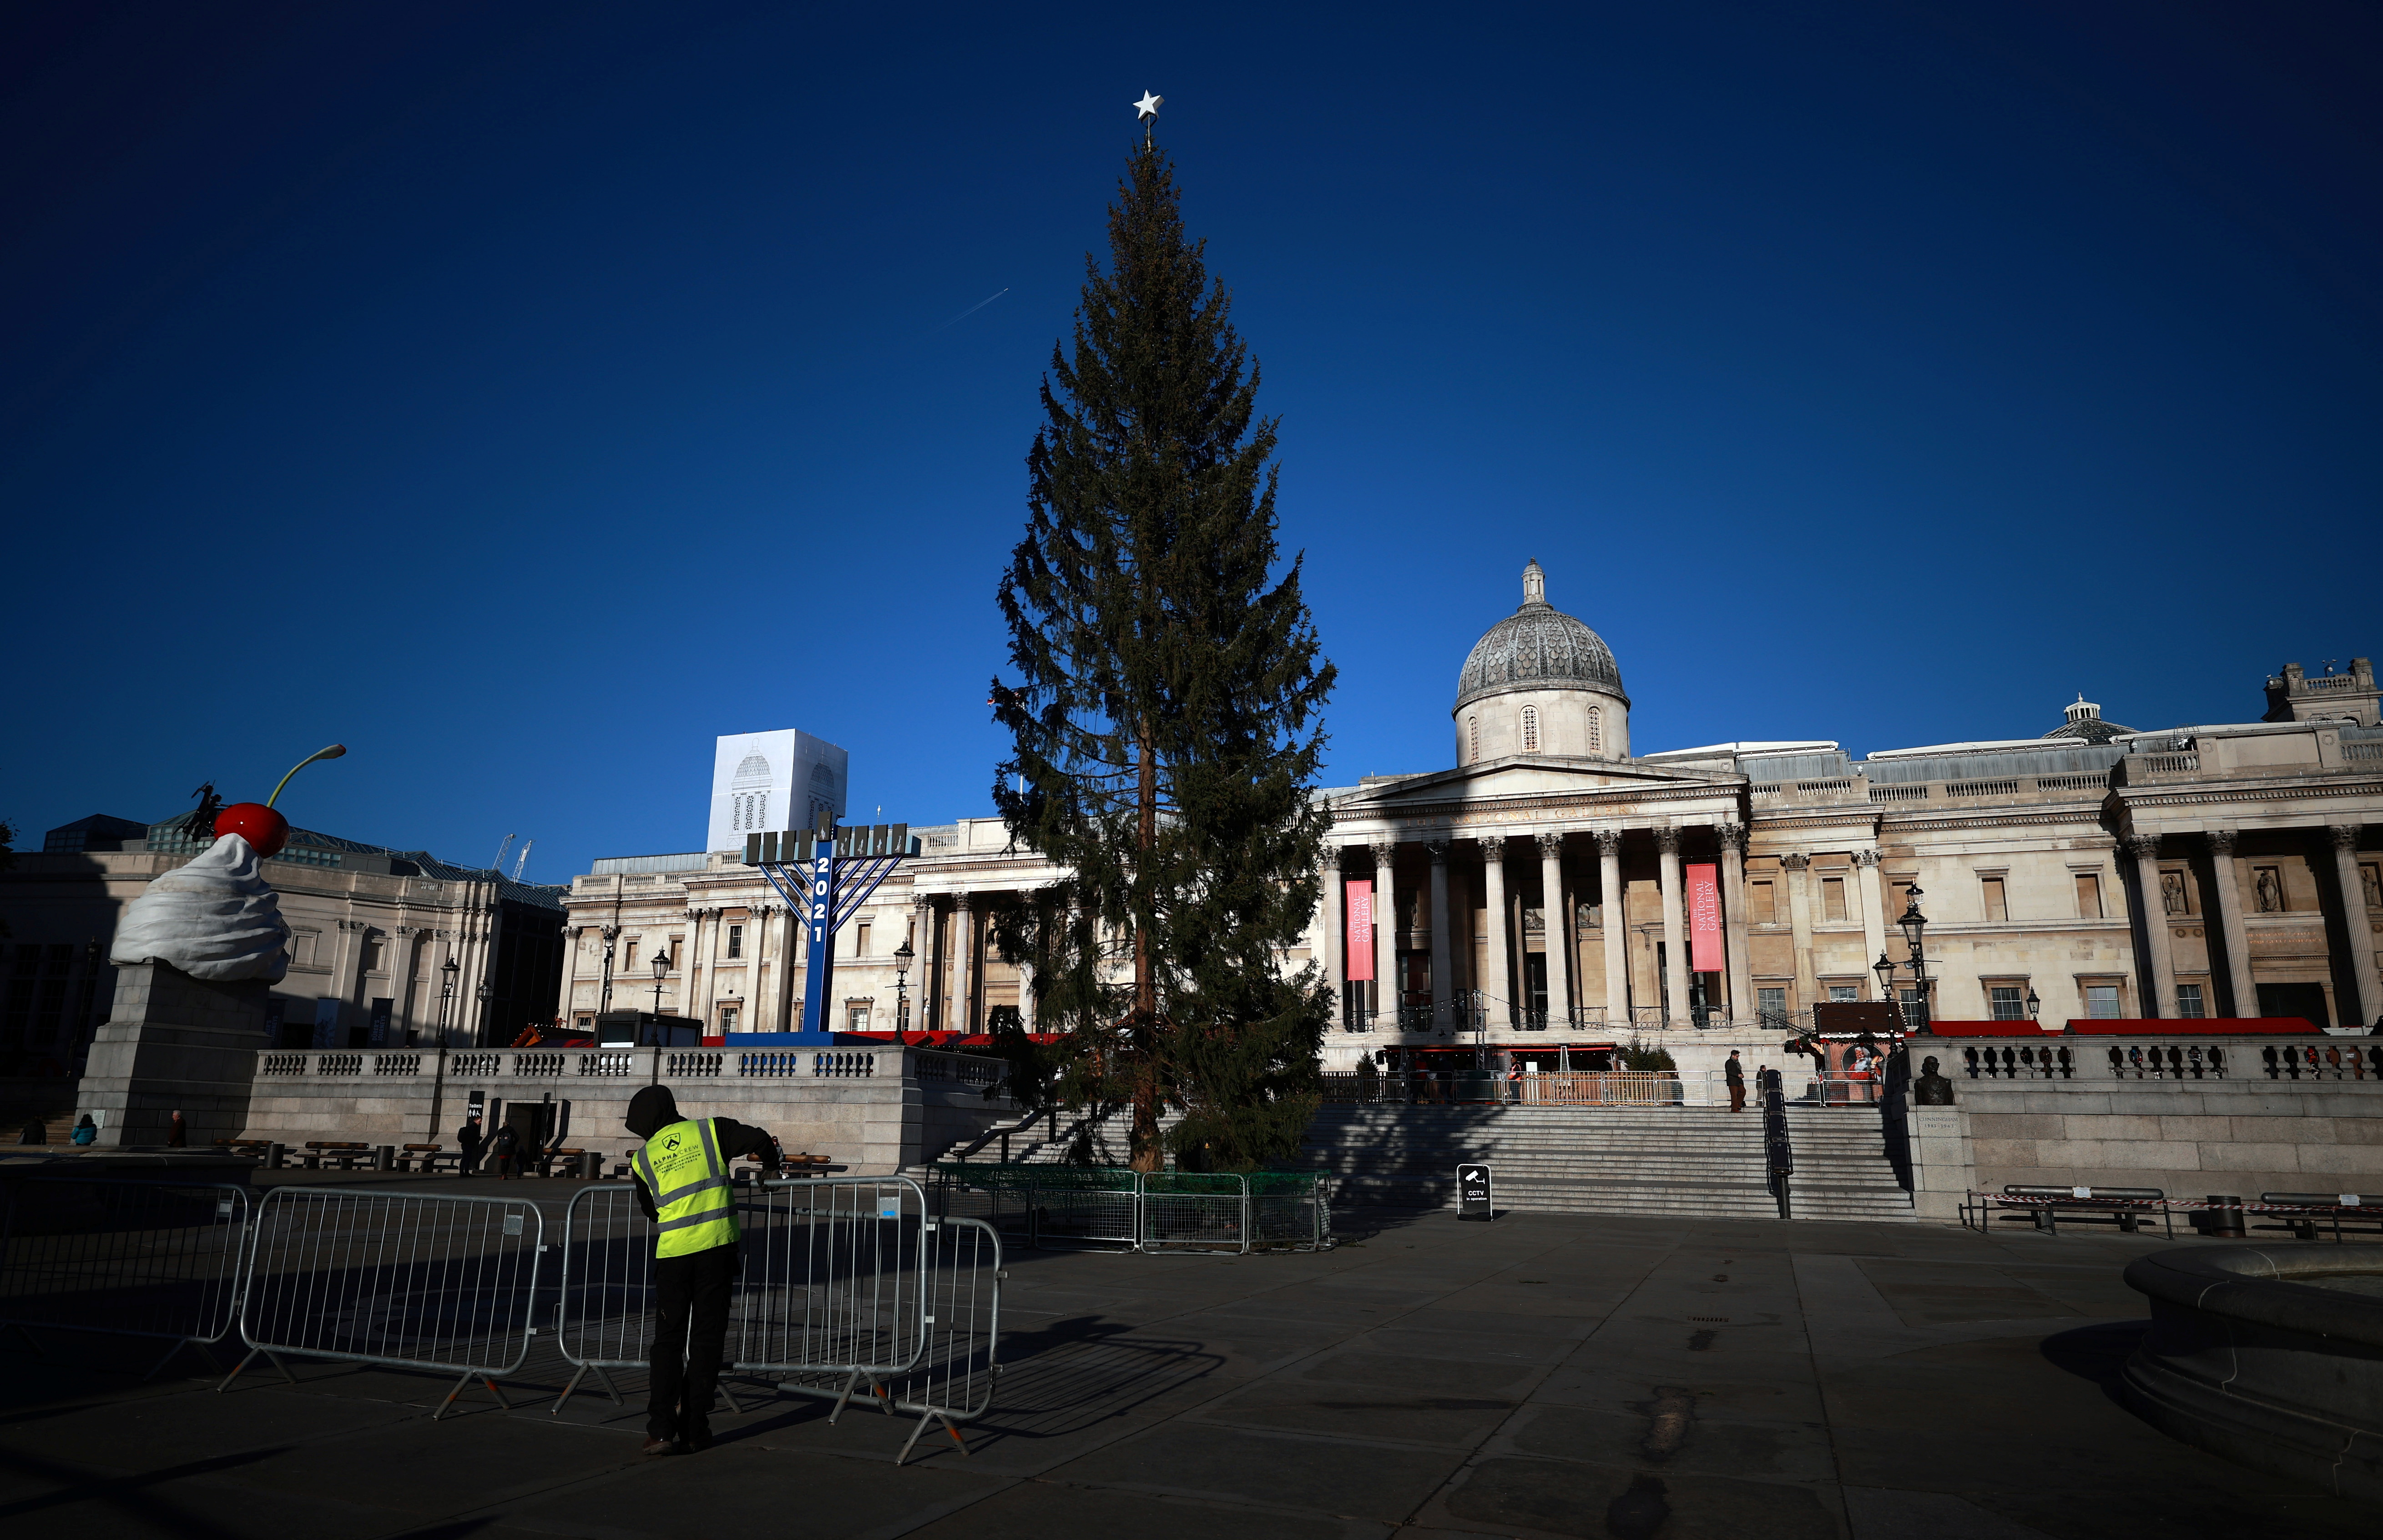 A view of the Trafalgar Square Christmas tree in London